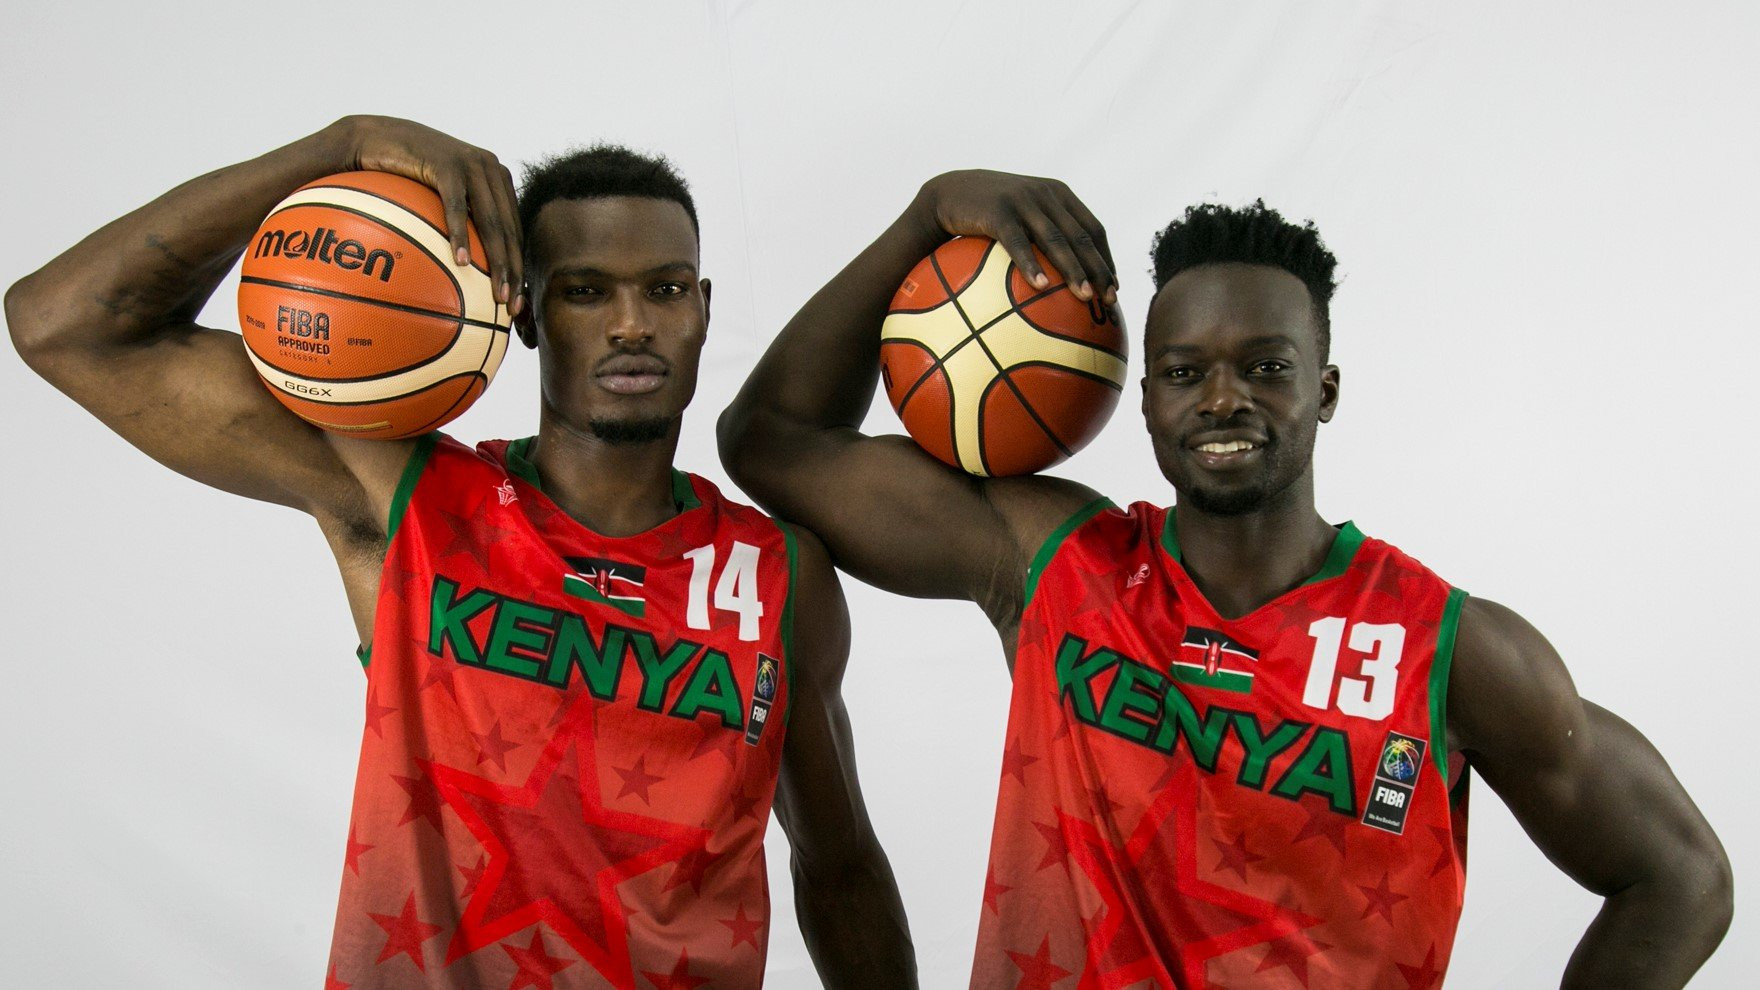 Kenya suffered defeat to DR Congo in their opening AfroCan match ©FIBA/Twitter